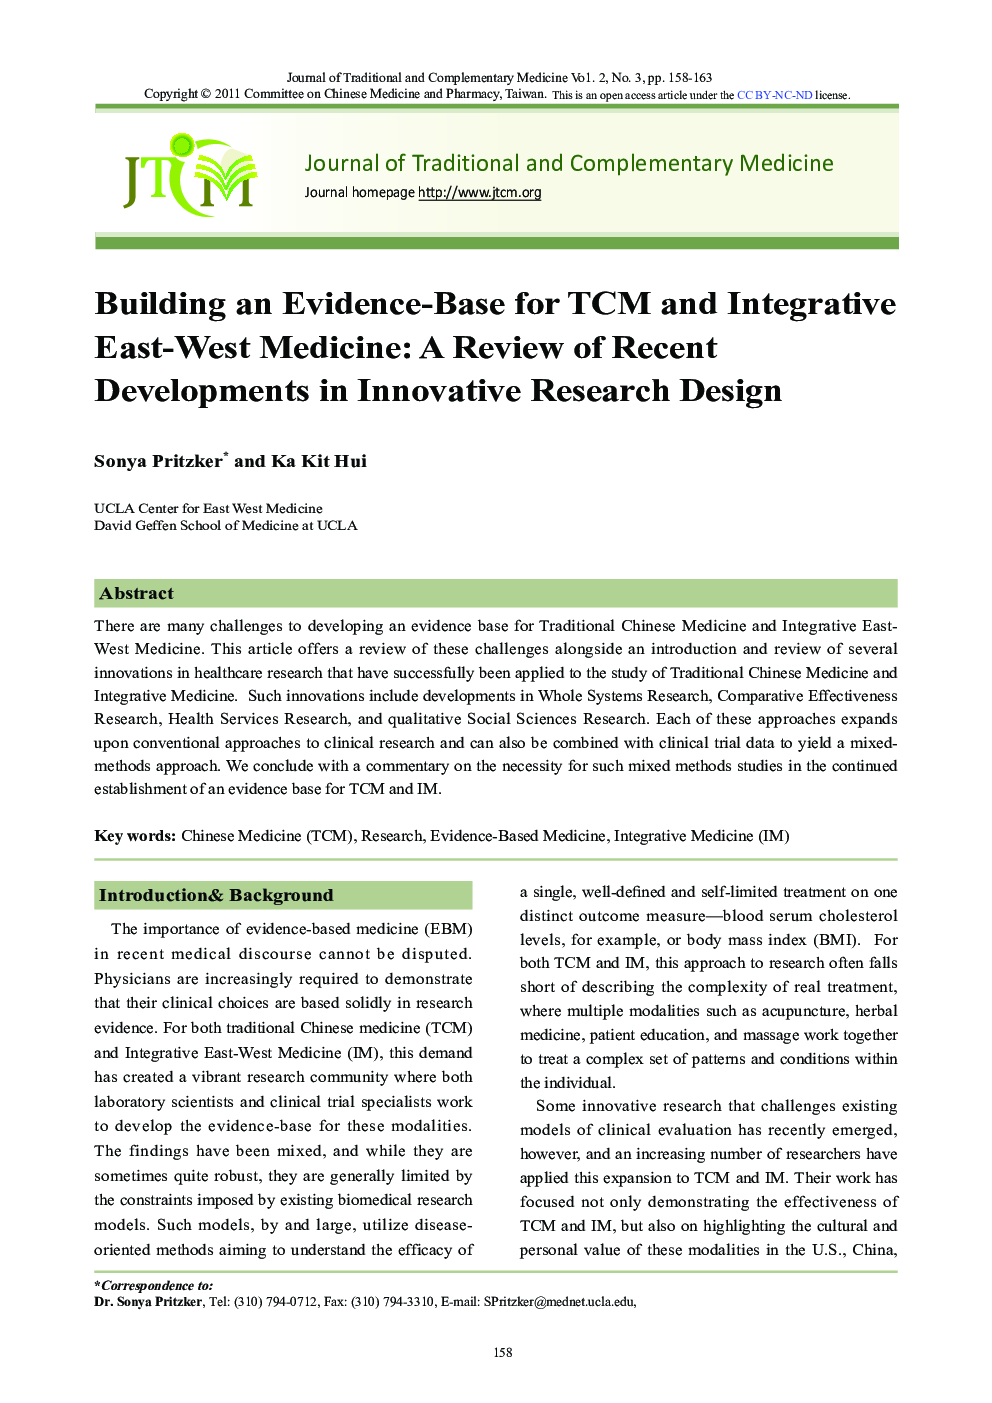 Building an Evidence-Base for TCM and Integrative East-West Medicine: A Review of Recent Developments in Innovative Research Design